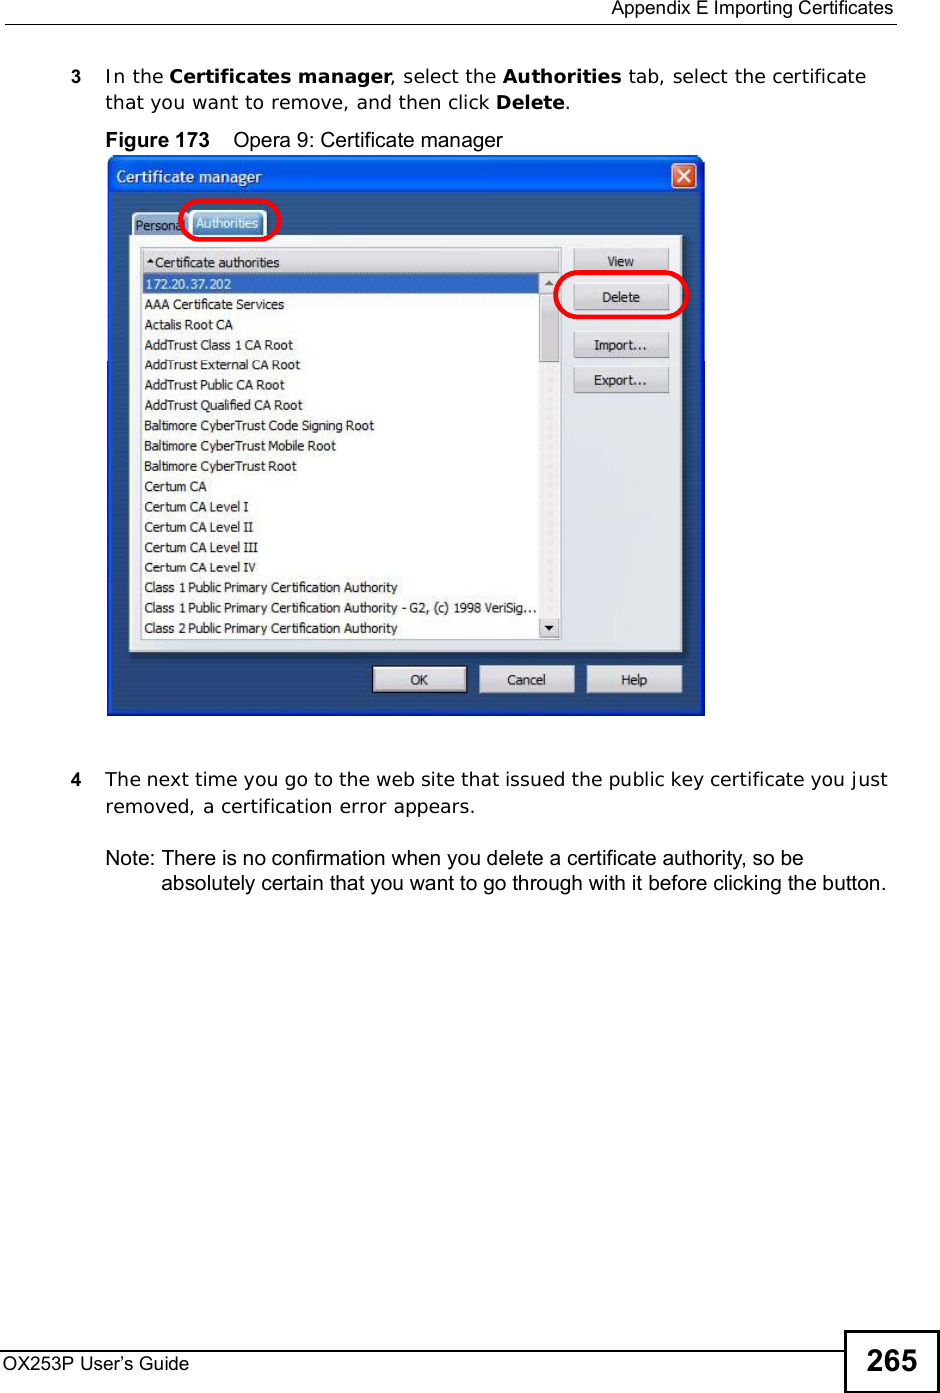  Appendix EImporting CertificatesOX253P User’s Guide 2653In the Certificates manager, select the Authorities tab, select the certificate that you want to remove, and then click Delete.Figure 173    Opera 9: Certificate manager4The next time you go to the web site that issued the public key certificate you just removed, a certification error appears.Note: There is no confirmation when you delete a certificate authority, so be absolutely certain that you want to go through with it before clicking the button.